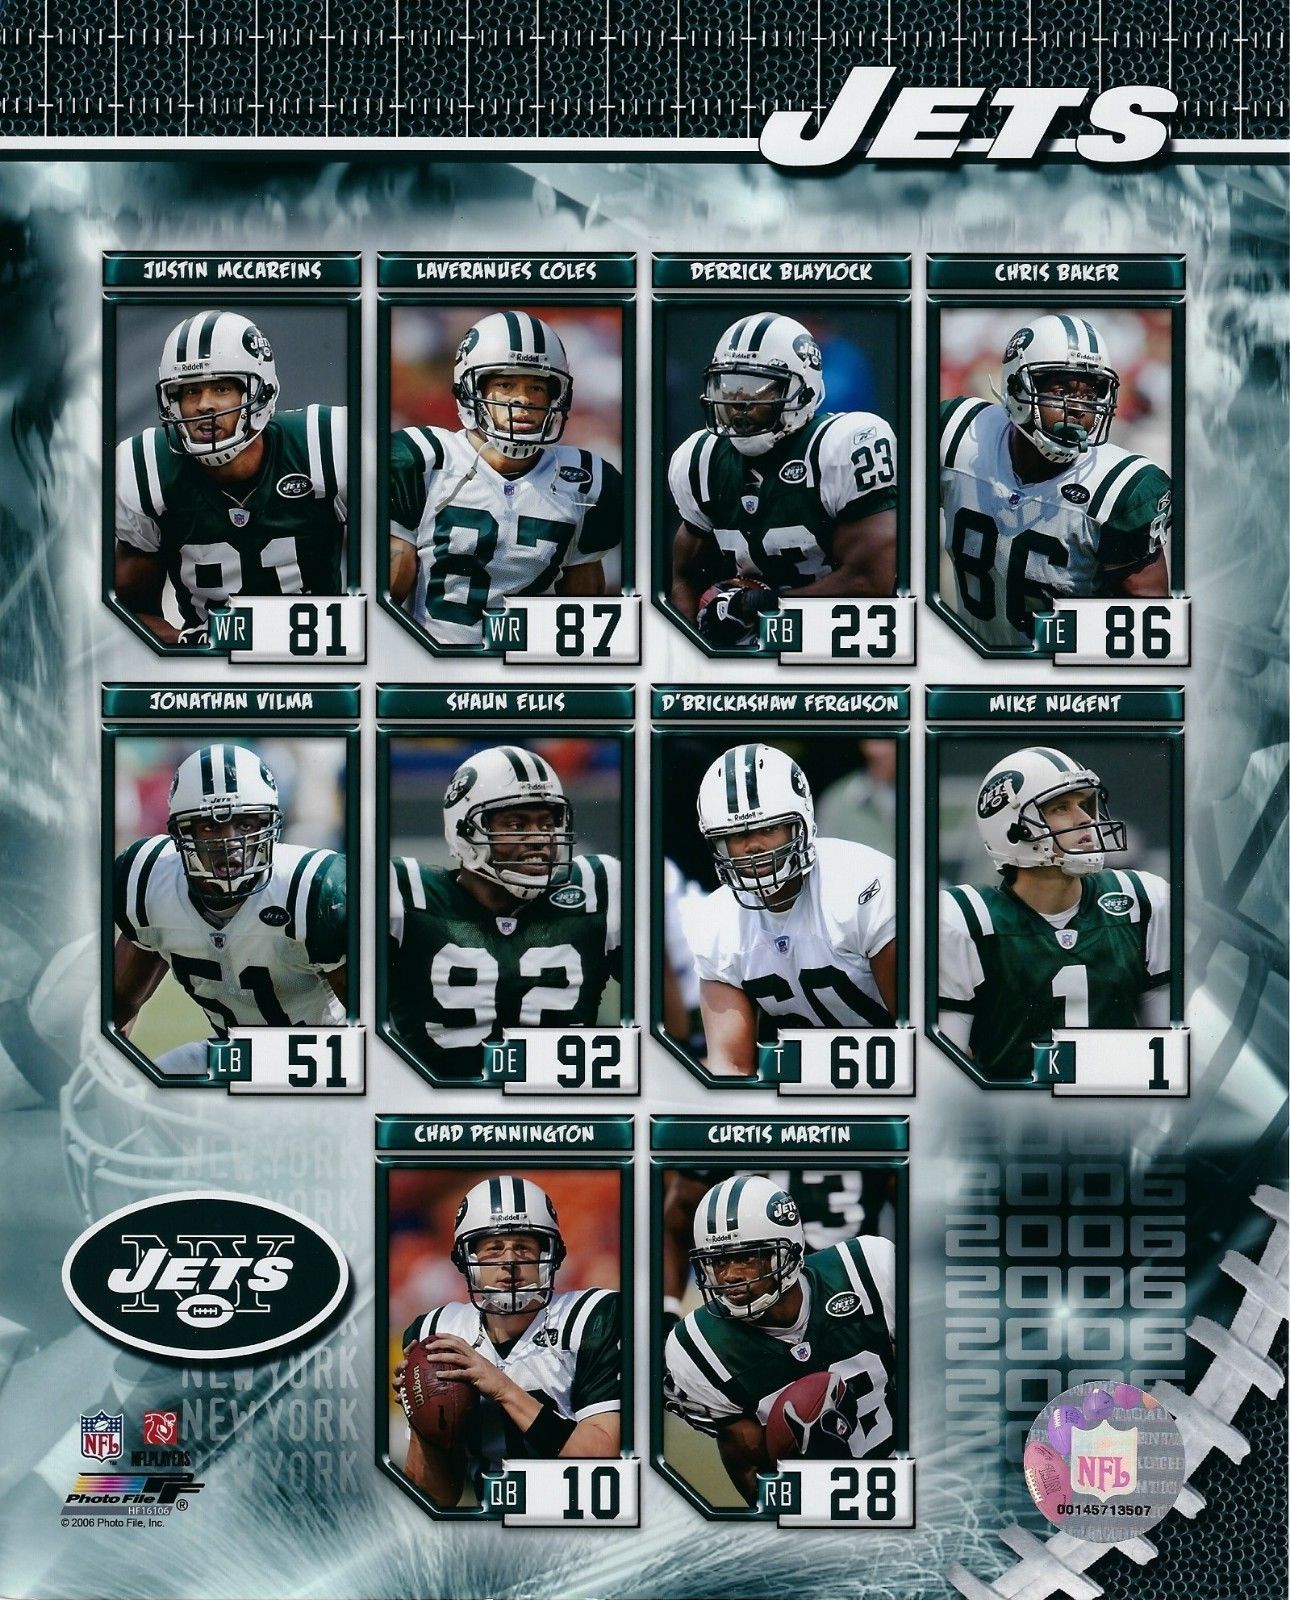 2006 NEW YORK JETS COLLAGE 8X10 PHOTO NY NFL FOOTBALL PICTURE - $4.94